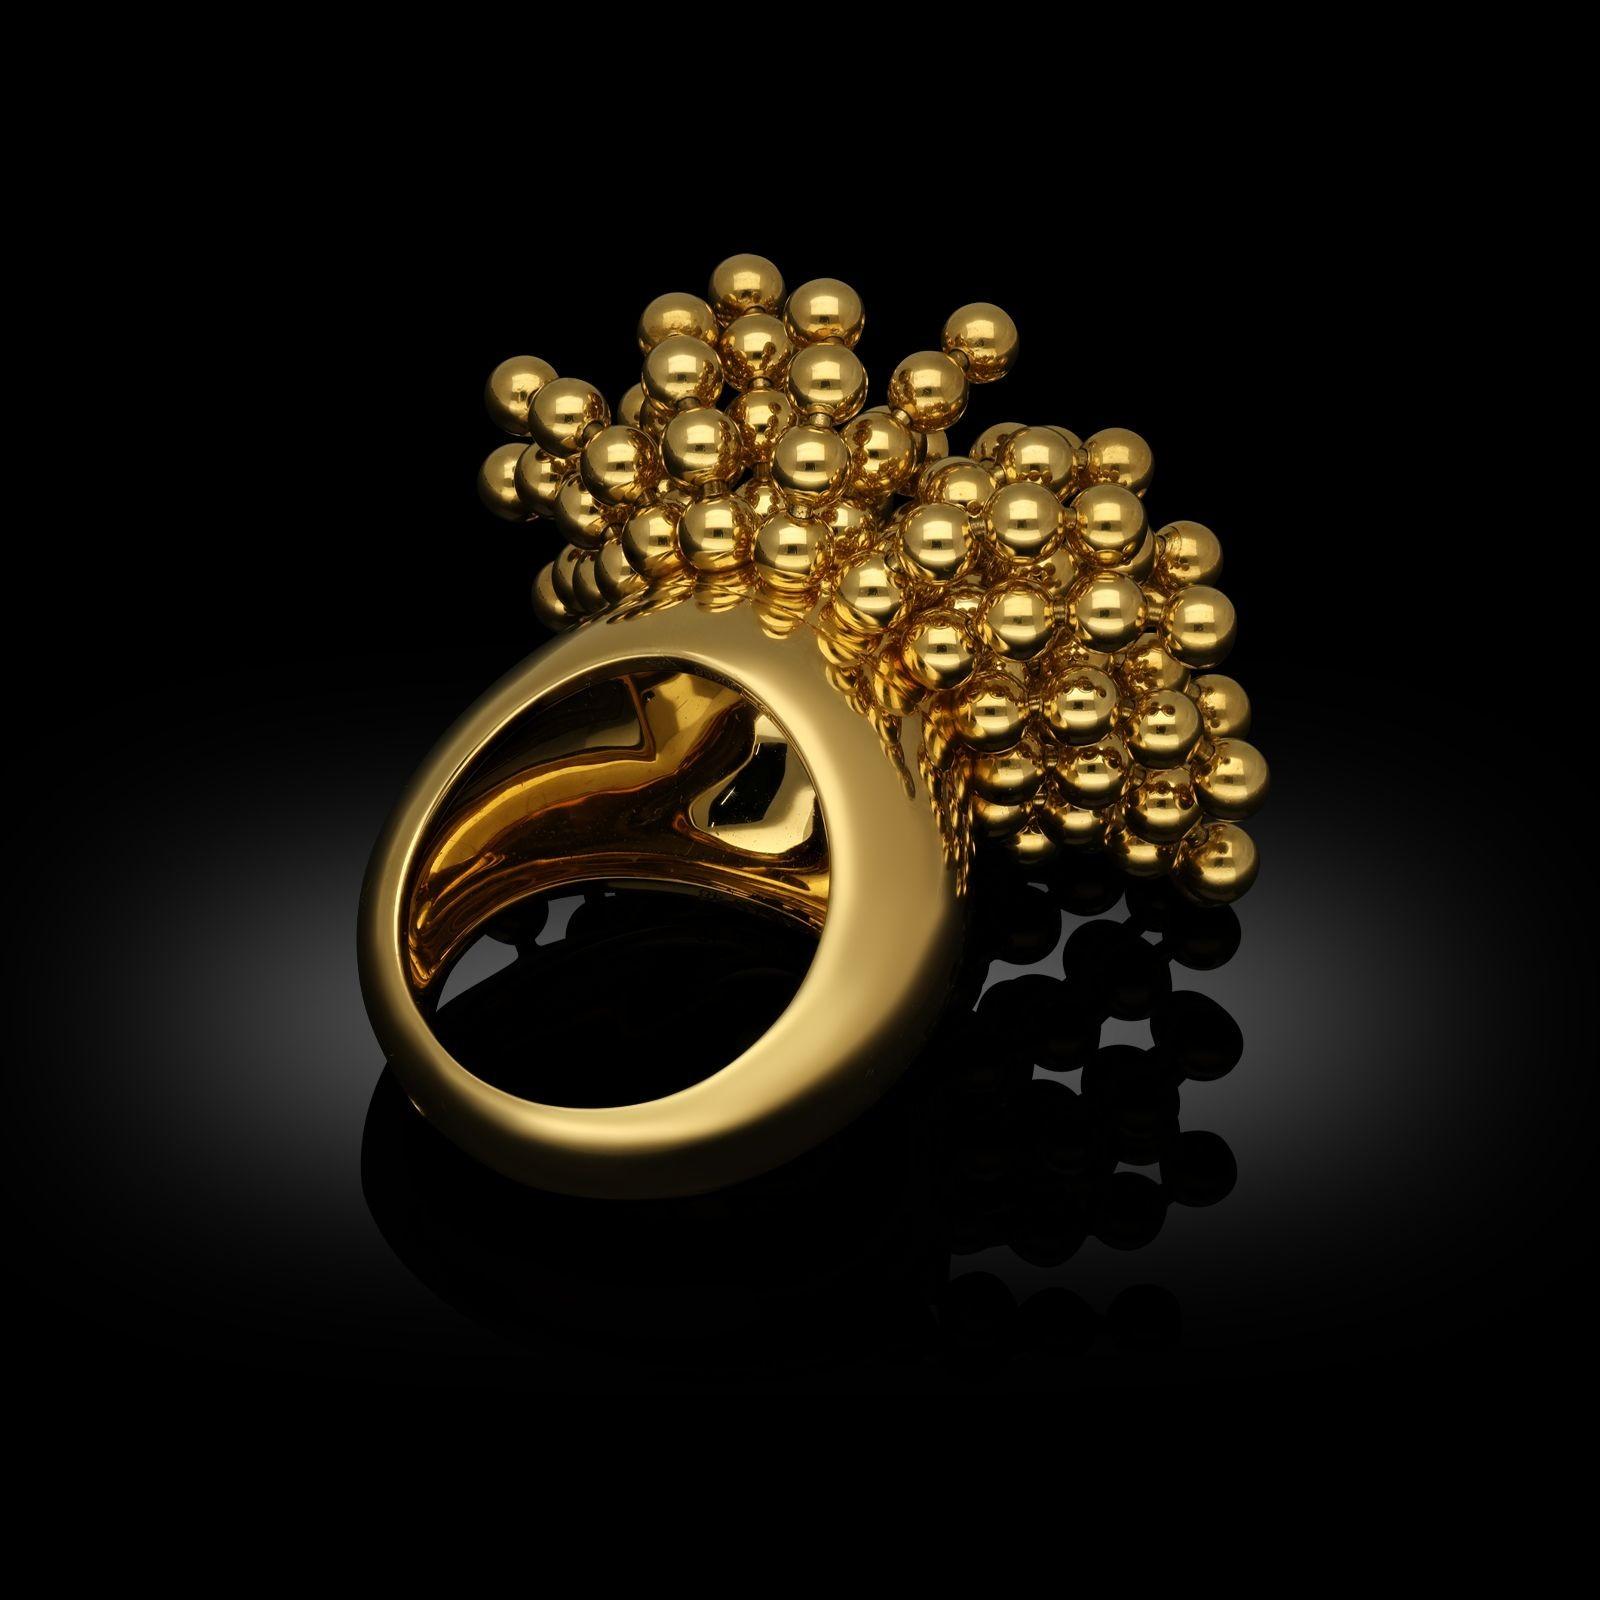 An 18ct yellow gold 'Perruque' cocktail ring by Cartier c.2020, from their ‘Paris Nouvelle Vague’ collection, the wide gold domed band supporting a highly articulated mass of gold spheres strung together to form a pom-pom style tassel cluster which